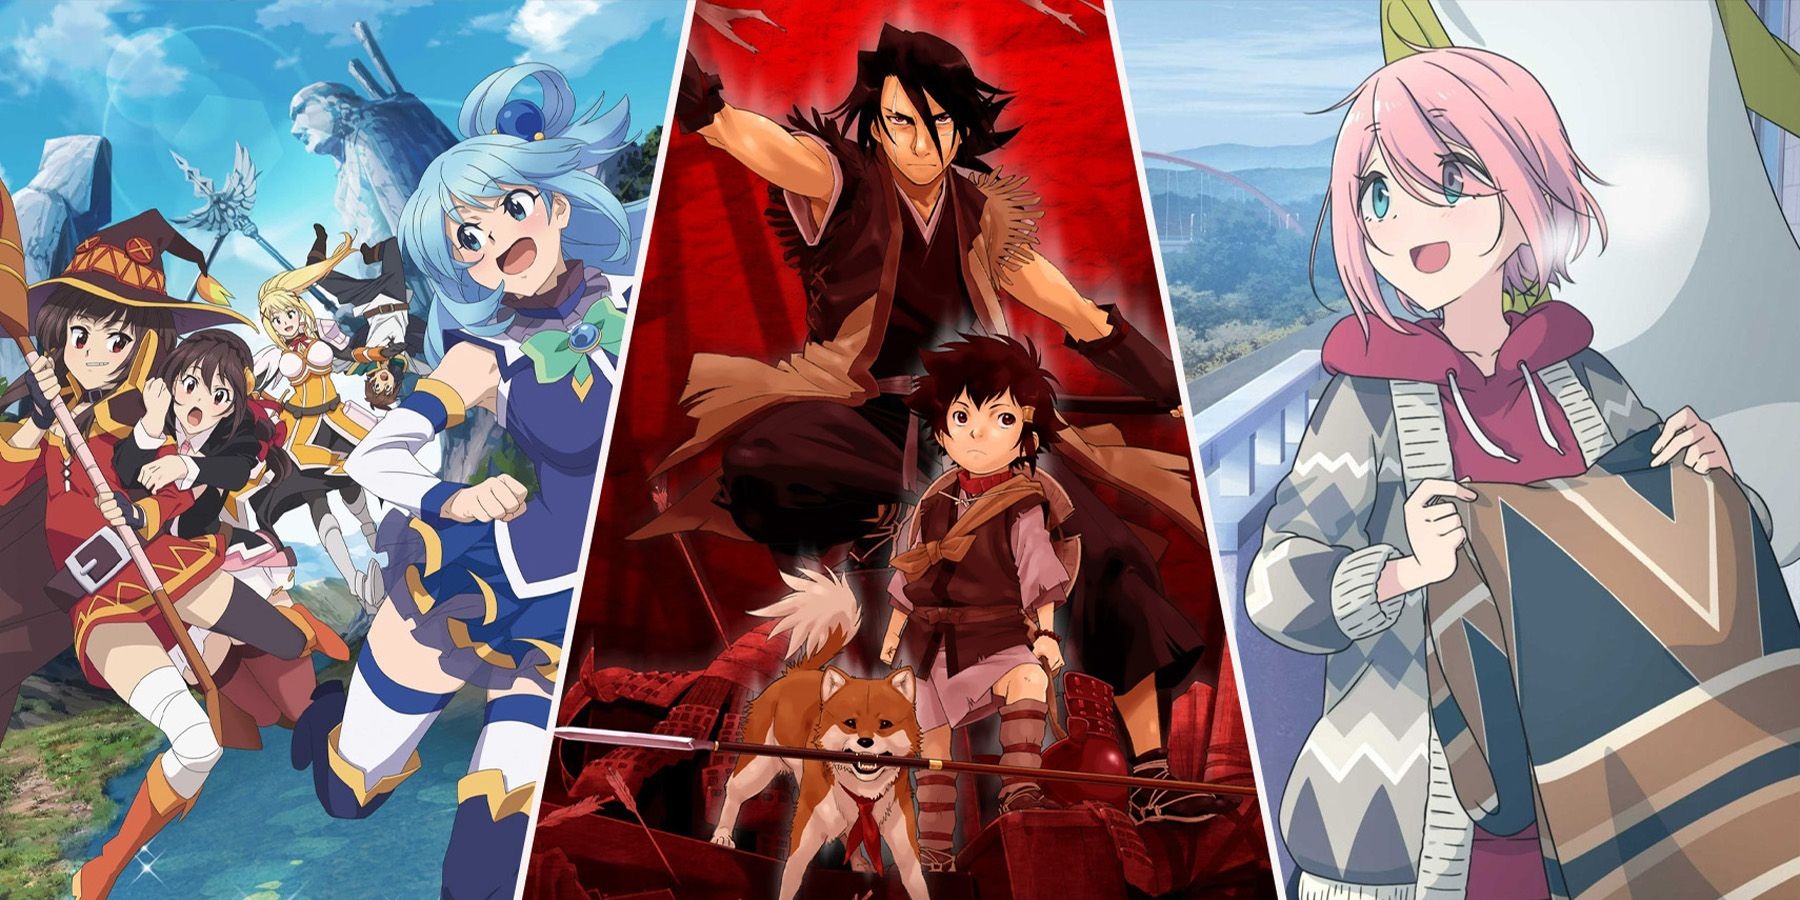 If you are bored of playing games, now you can watch anime for free with Game Pass subscription